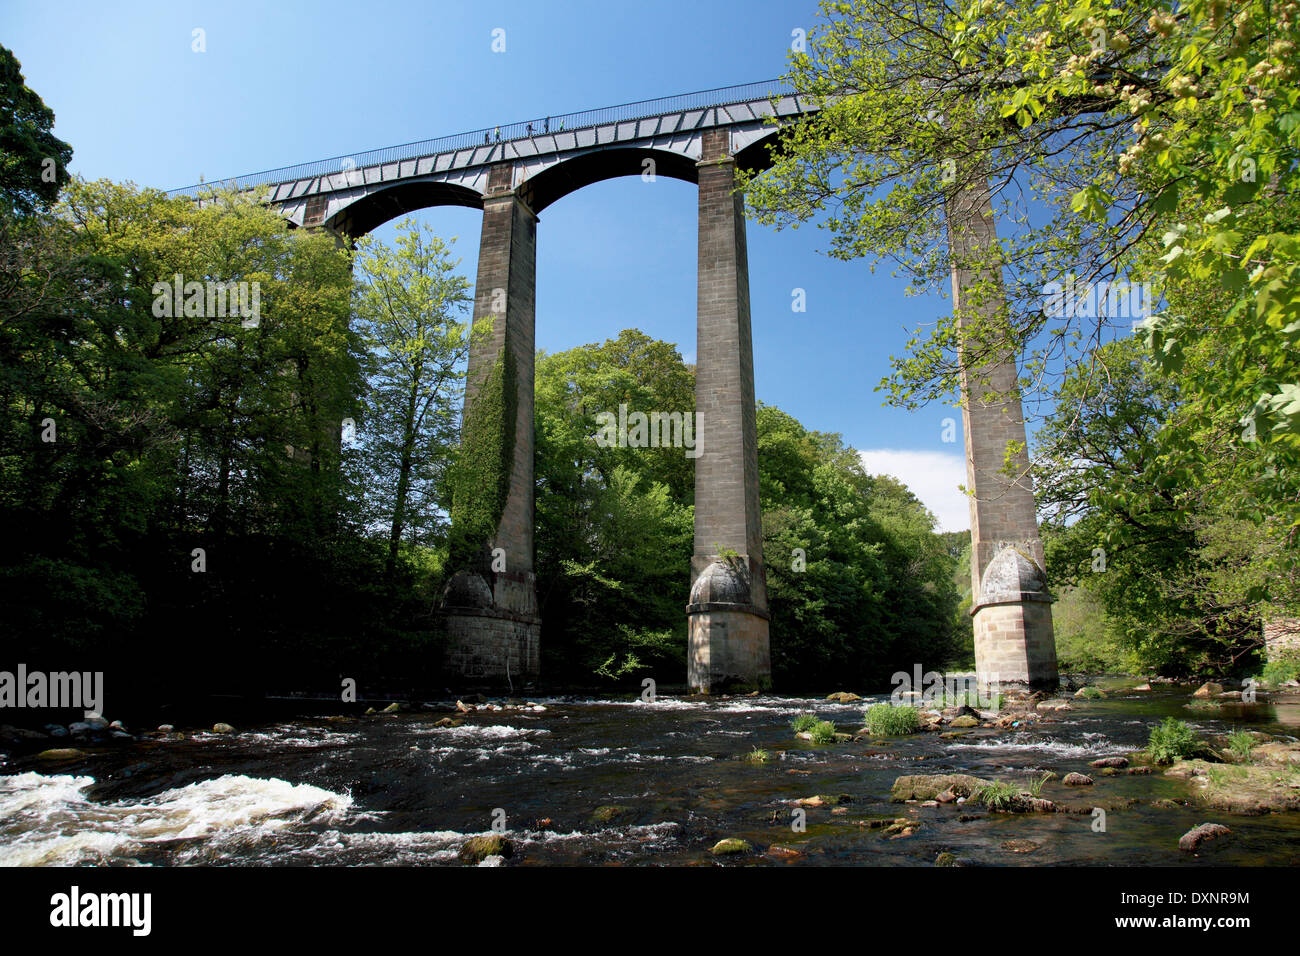 Pontcysyllte Aqueduct which carries the Llangollen Canal over the river Dee in north Wales Stock Photo